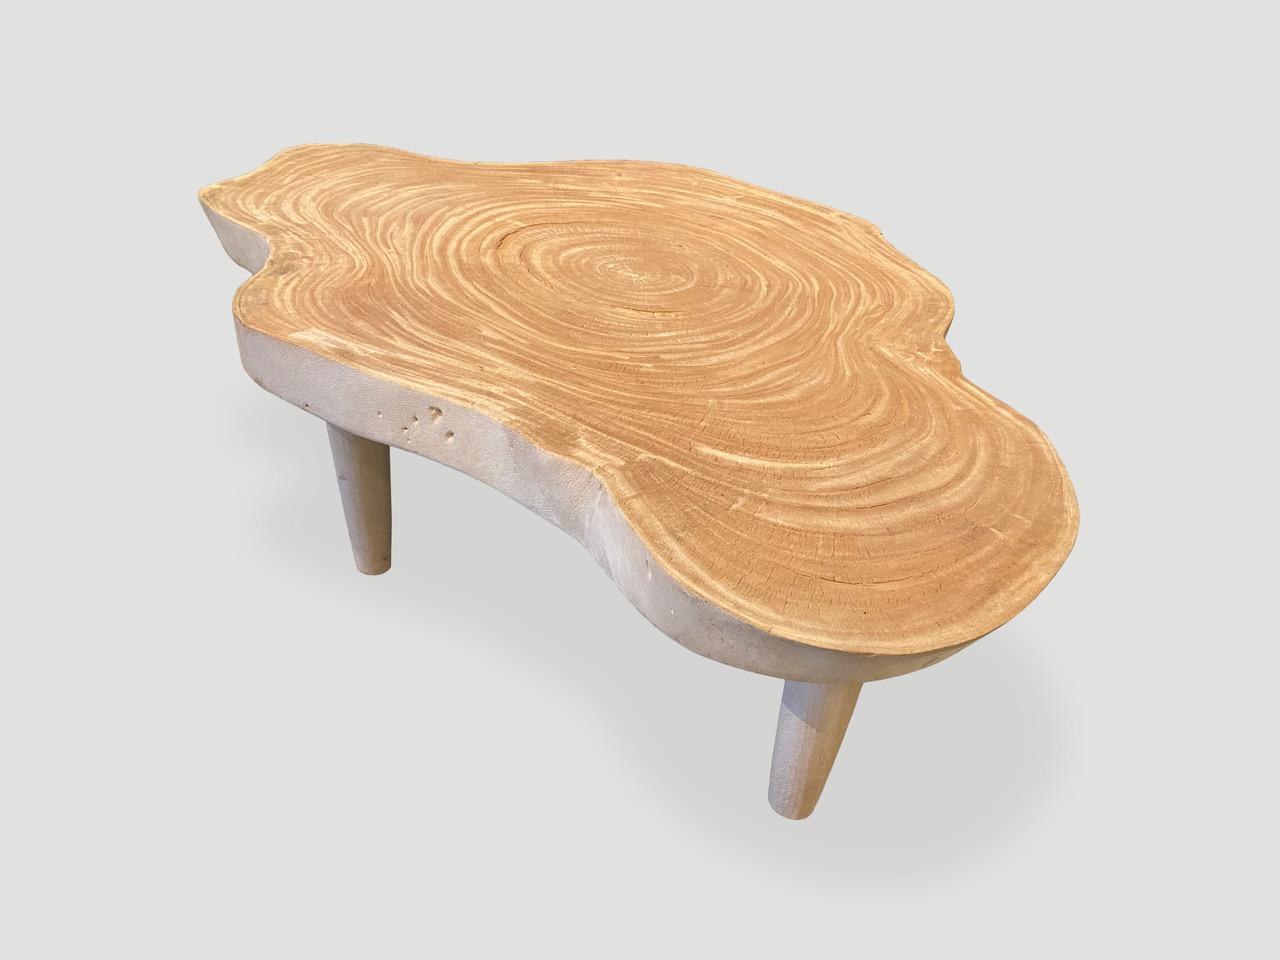 Impressive three inch slab coffee table, set on cone shaped mid century style legs. The wood is unknown though indigenous to Indonesia. We love the natural way it ‘crackles’ after we applied the bleach to the wood and left in the sun to turn this